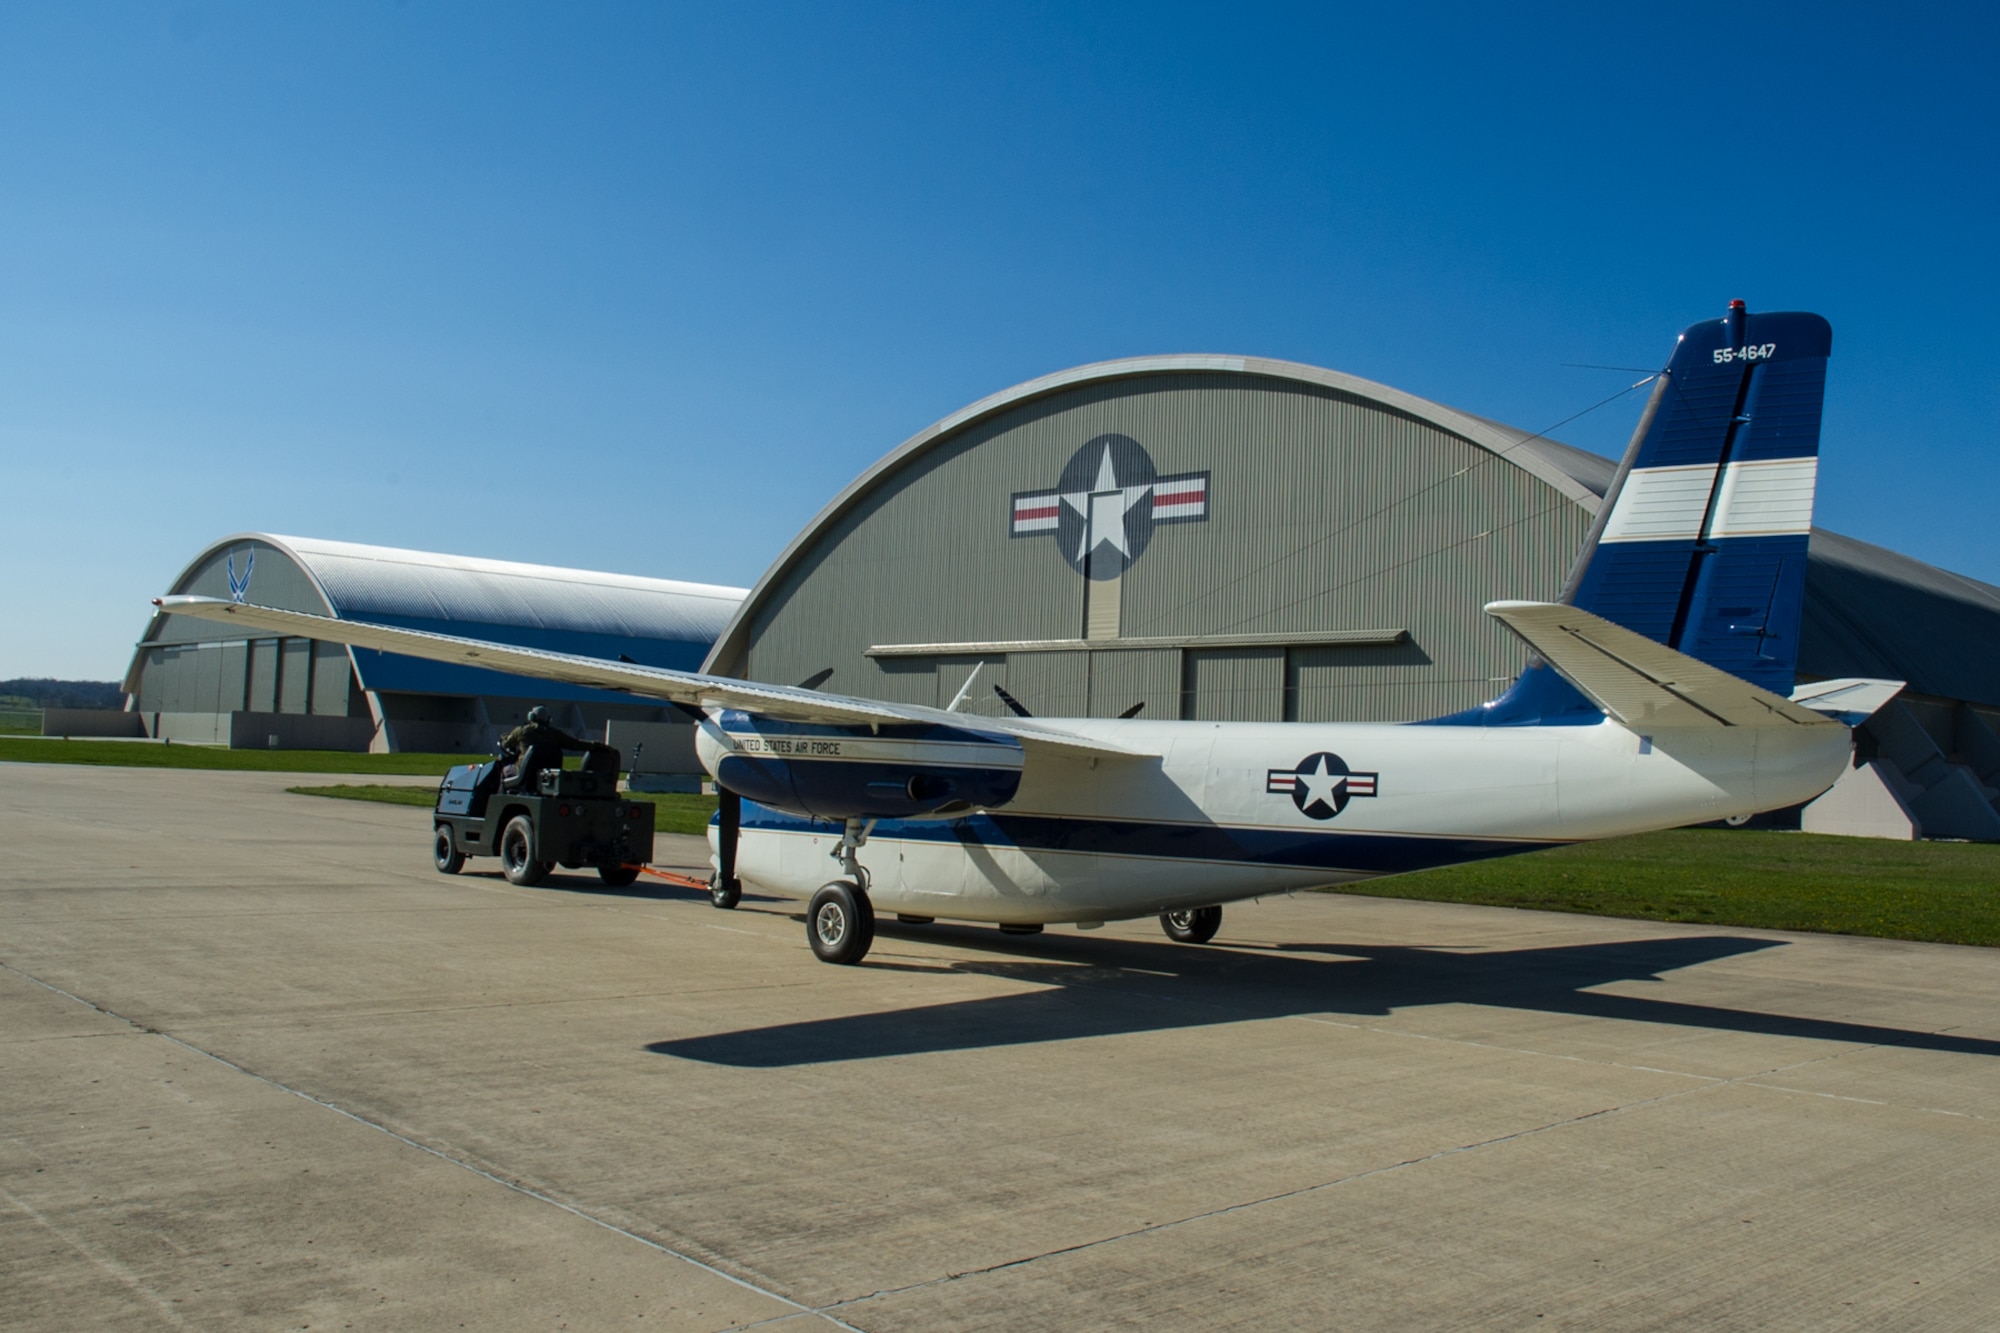 DAYTON, Ohio -- The Aero Commander U-4B being towed into the fourth building at the National Museum of the United States Air Force on April 12, 2016. This aircraft is one of ten Presidential aircraft in the collection. (U.S. Air Force photo by Ken LaRock)